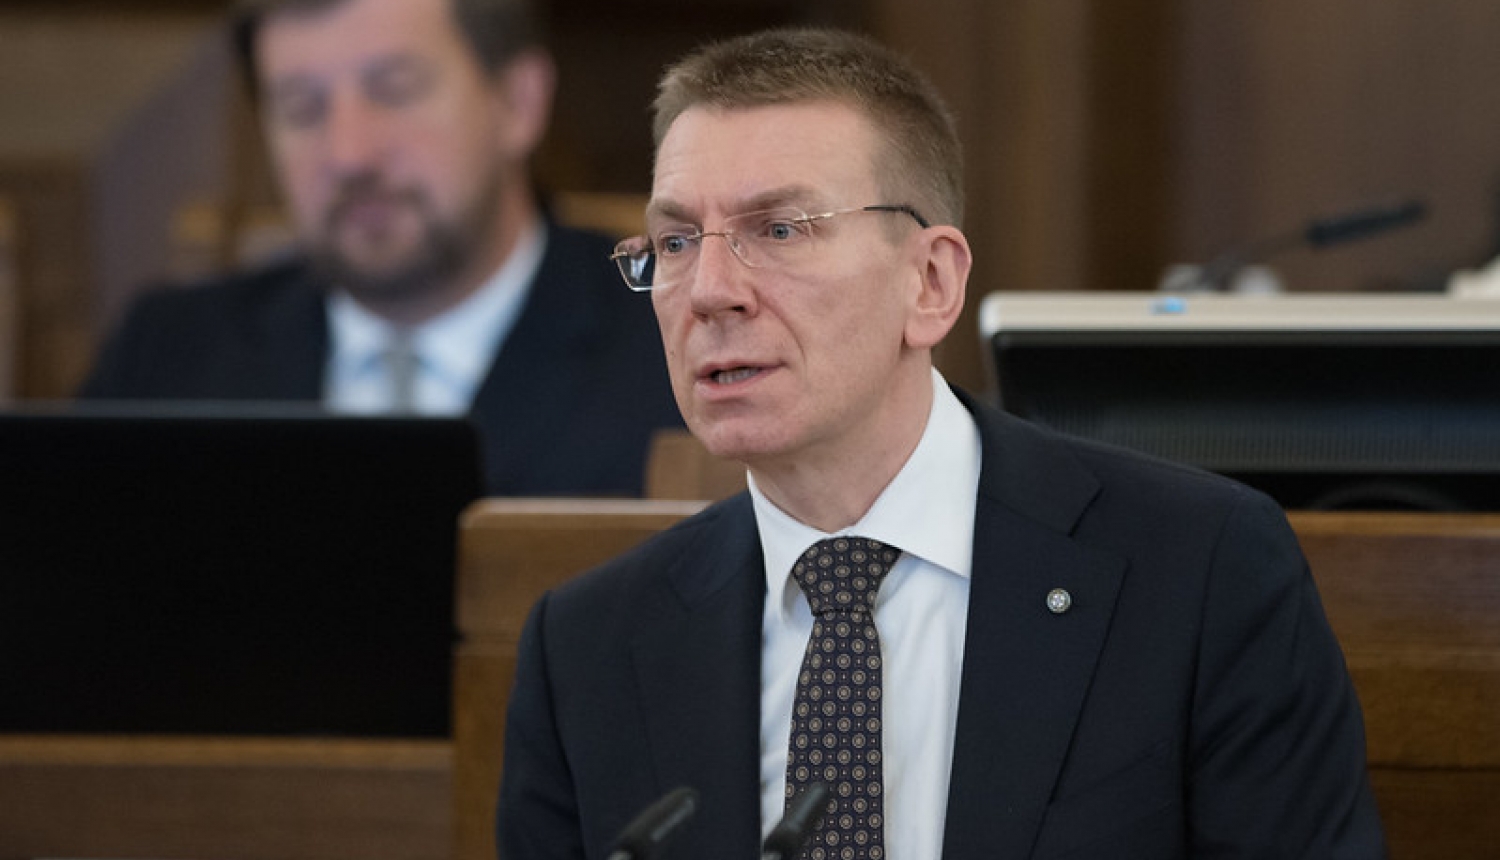 Speech by Foreign Minister Edgars Rinkēvičs at the annual Foreign Policy Debate in the Latvian Parliament (Saeima), 23 January 2020